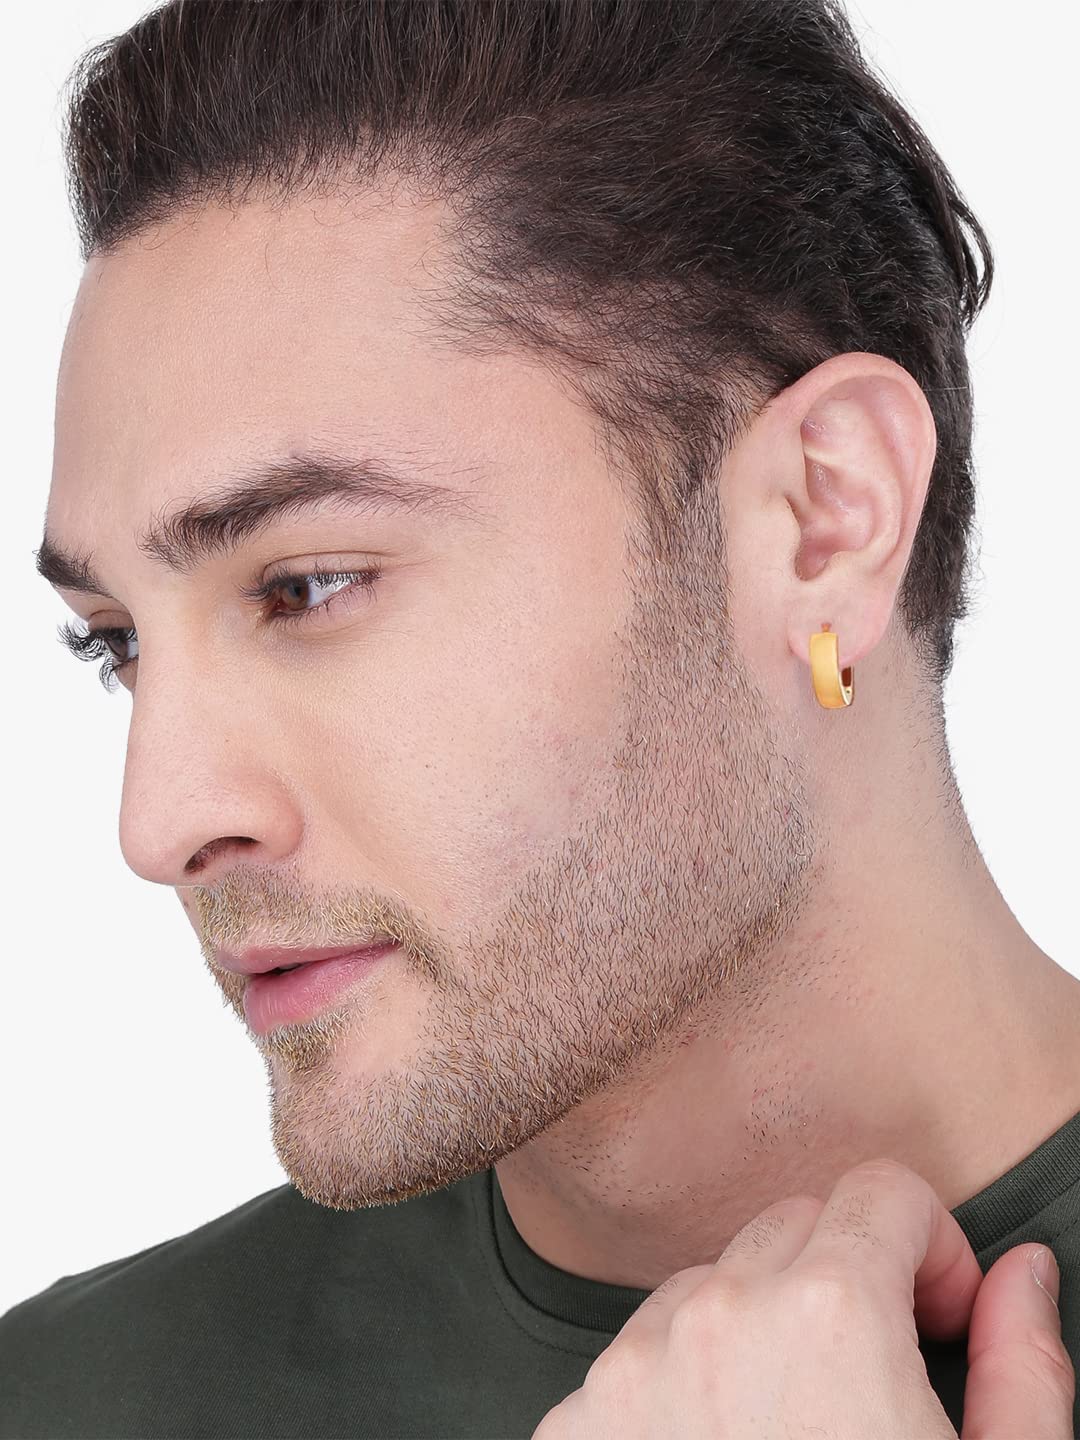 Mens gold stud earrings brushed 24K gold plated over 925 silver post  earrings  eBay  Mens gold stud earrings Stud earrings for men Silver  crystal earrings